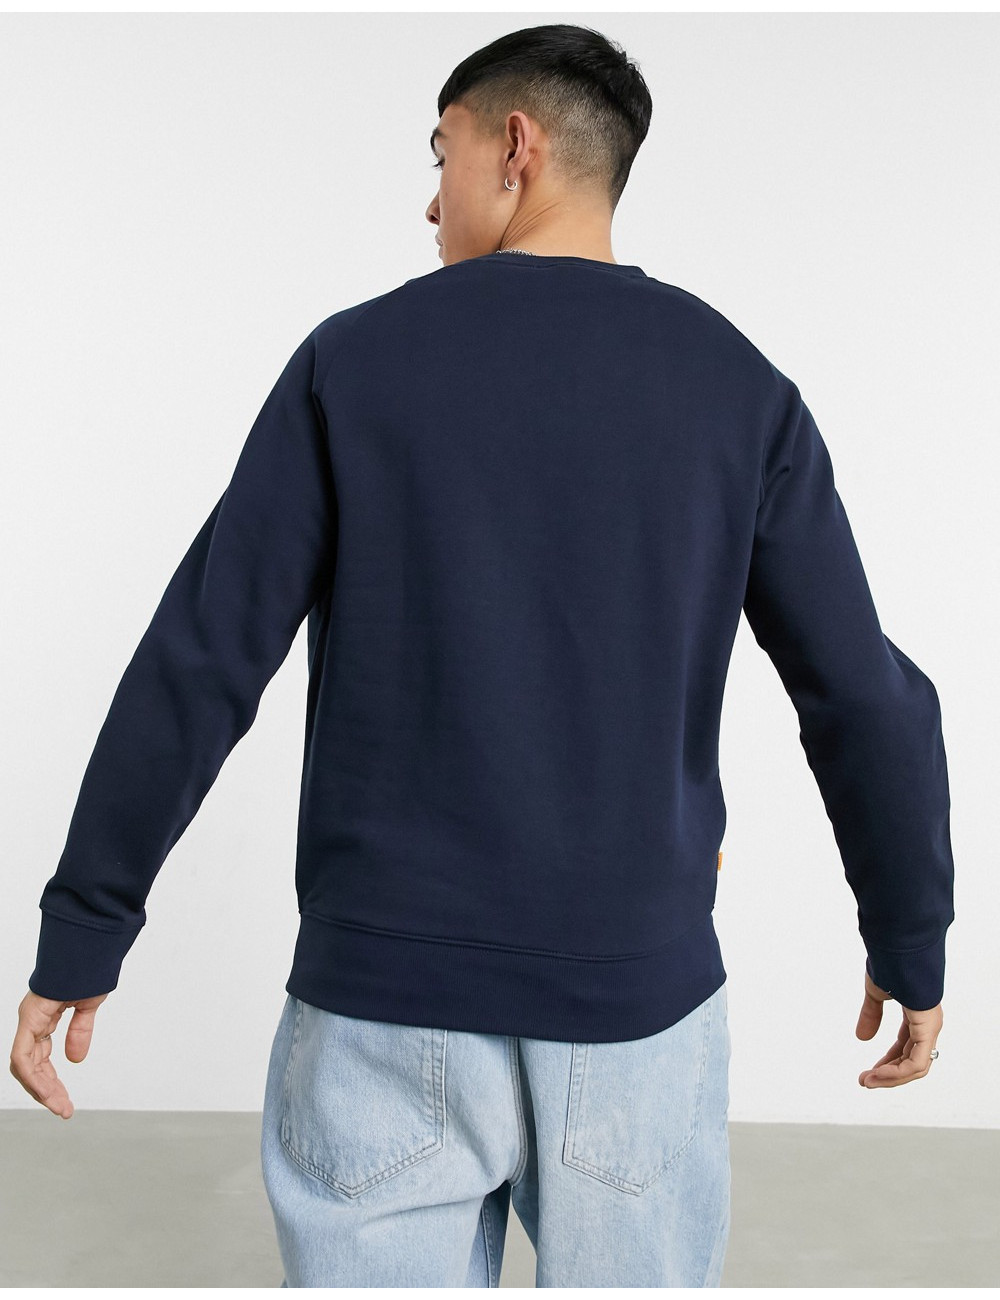 Timberland oyster crew neck...